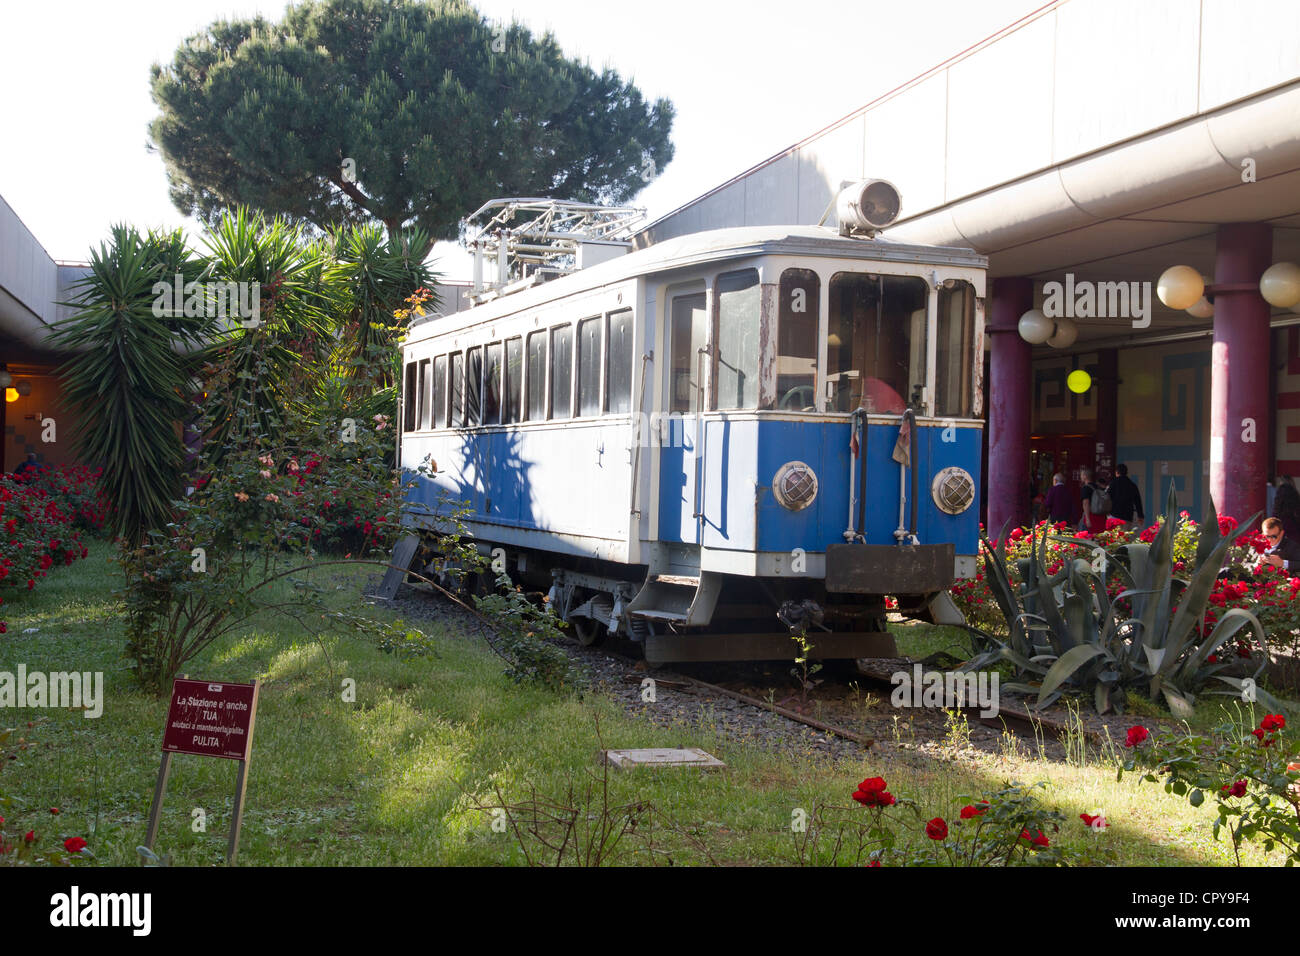 Old style tram train wagon standing displayed at Anagnina station in Rome Italy Stock Photo